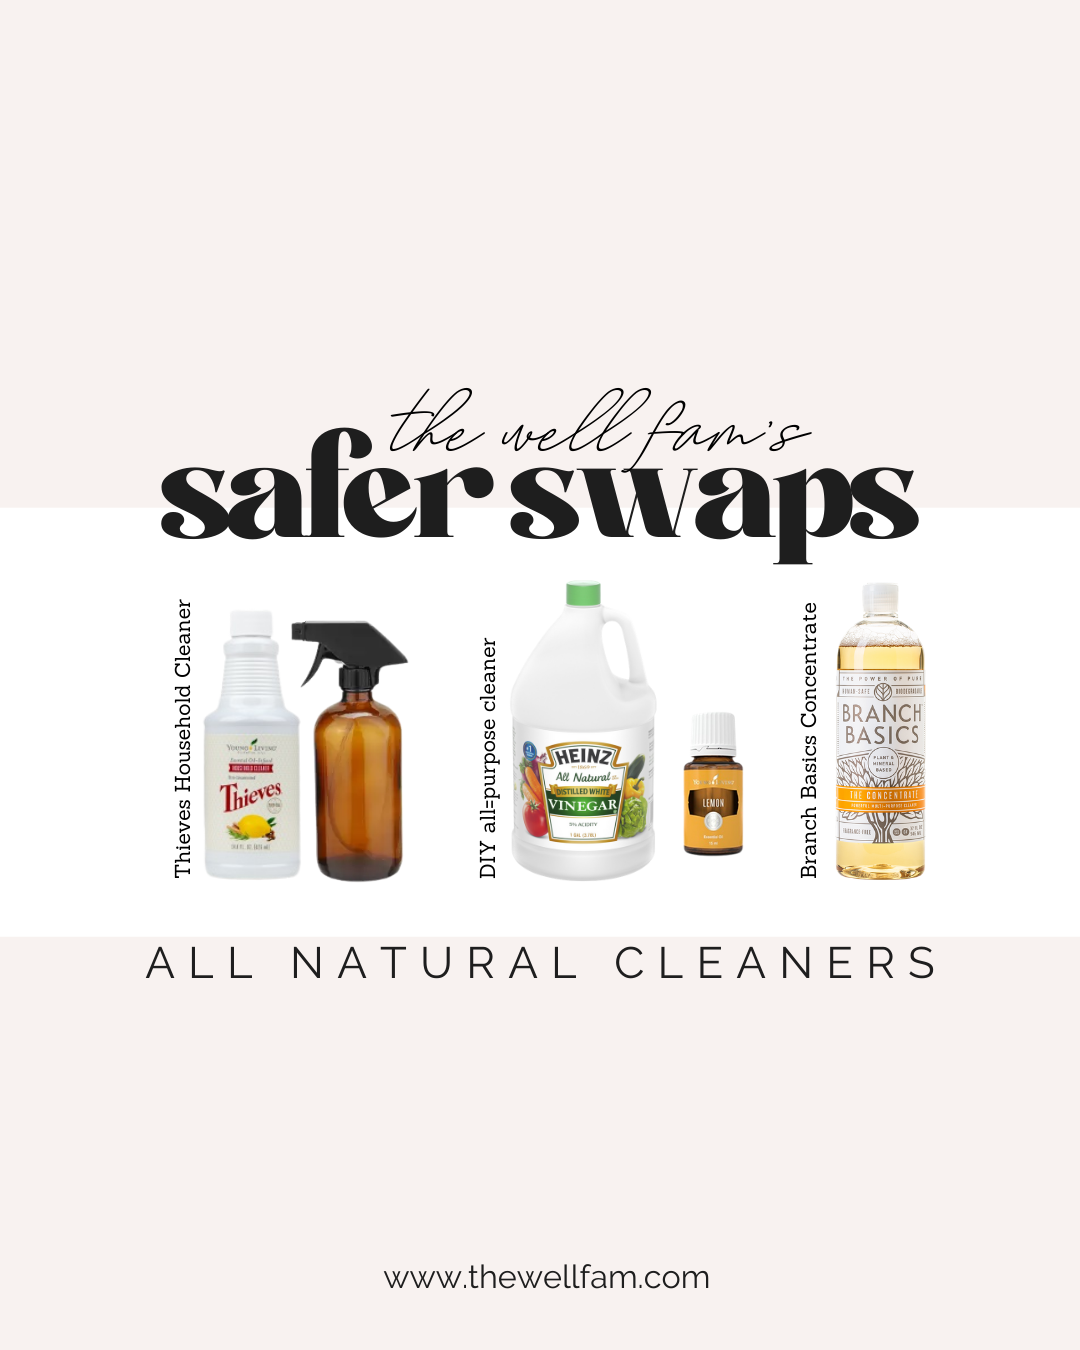 All Natural Cleaners